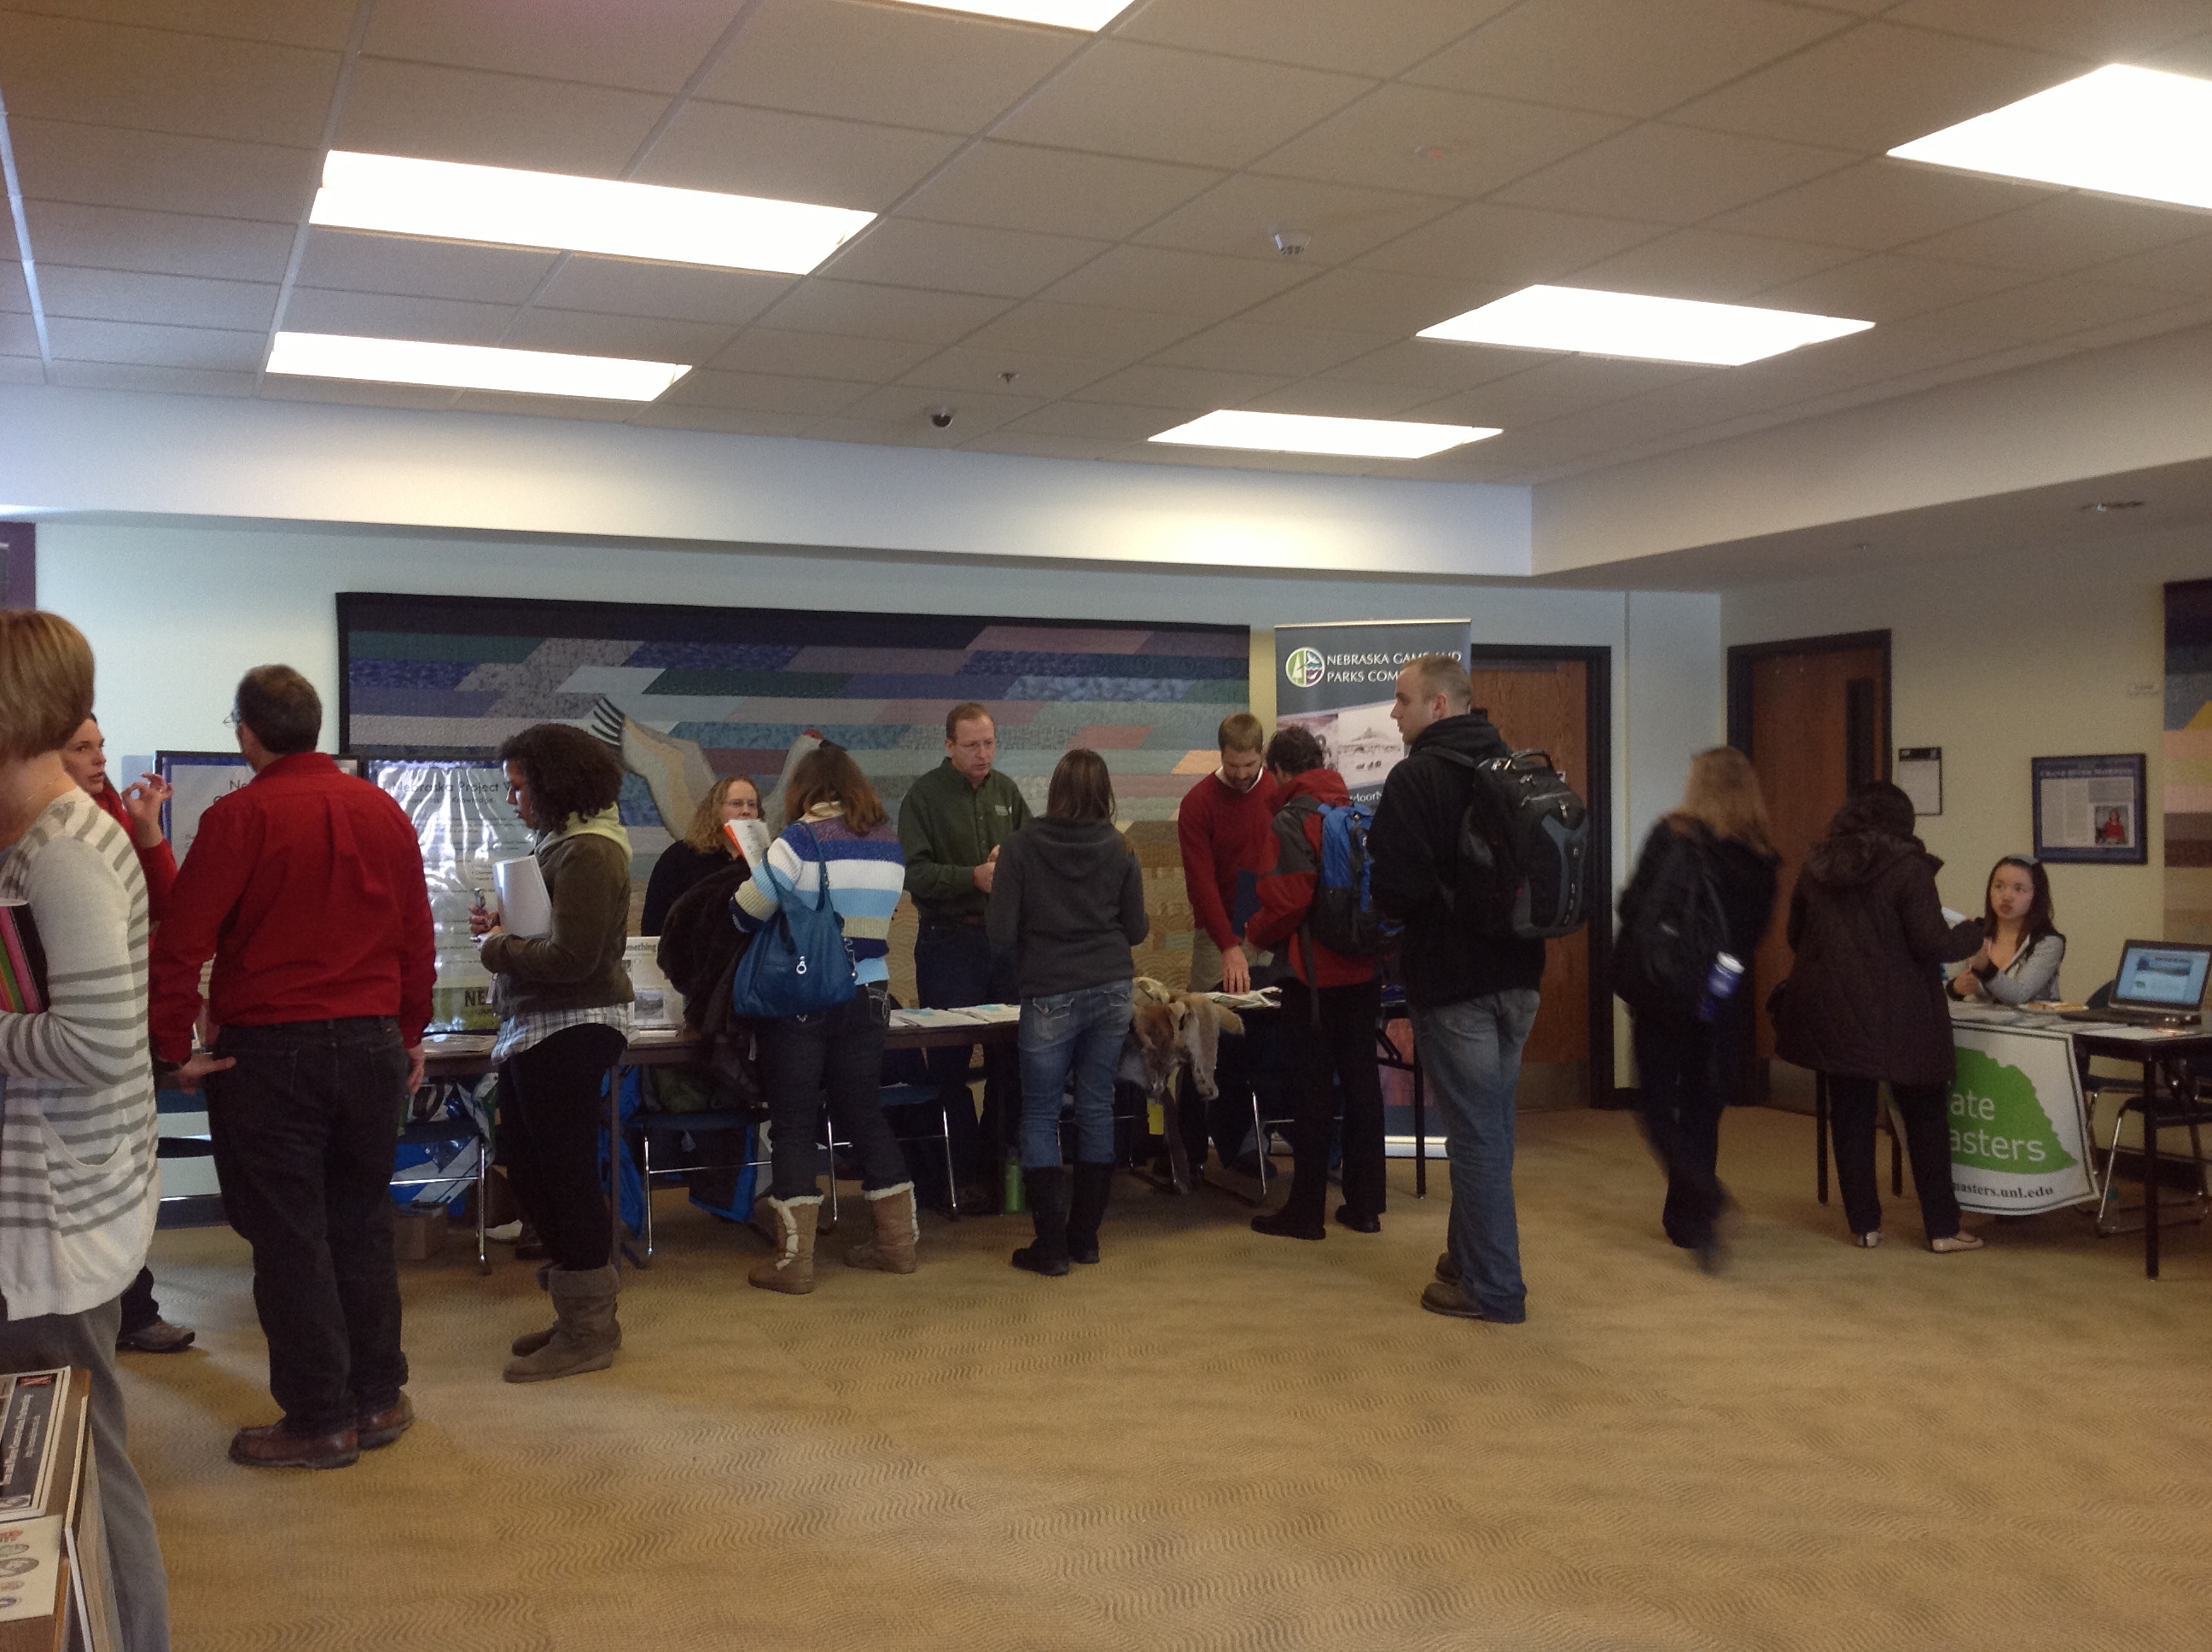 Approximately 130 students attended the SNR Career Information Fair